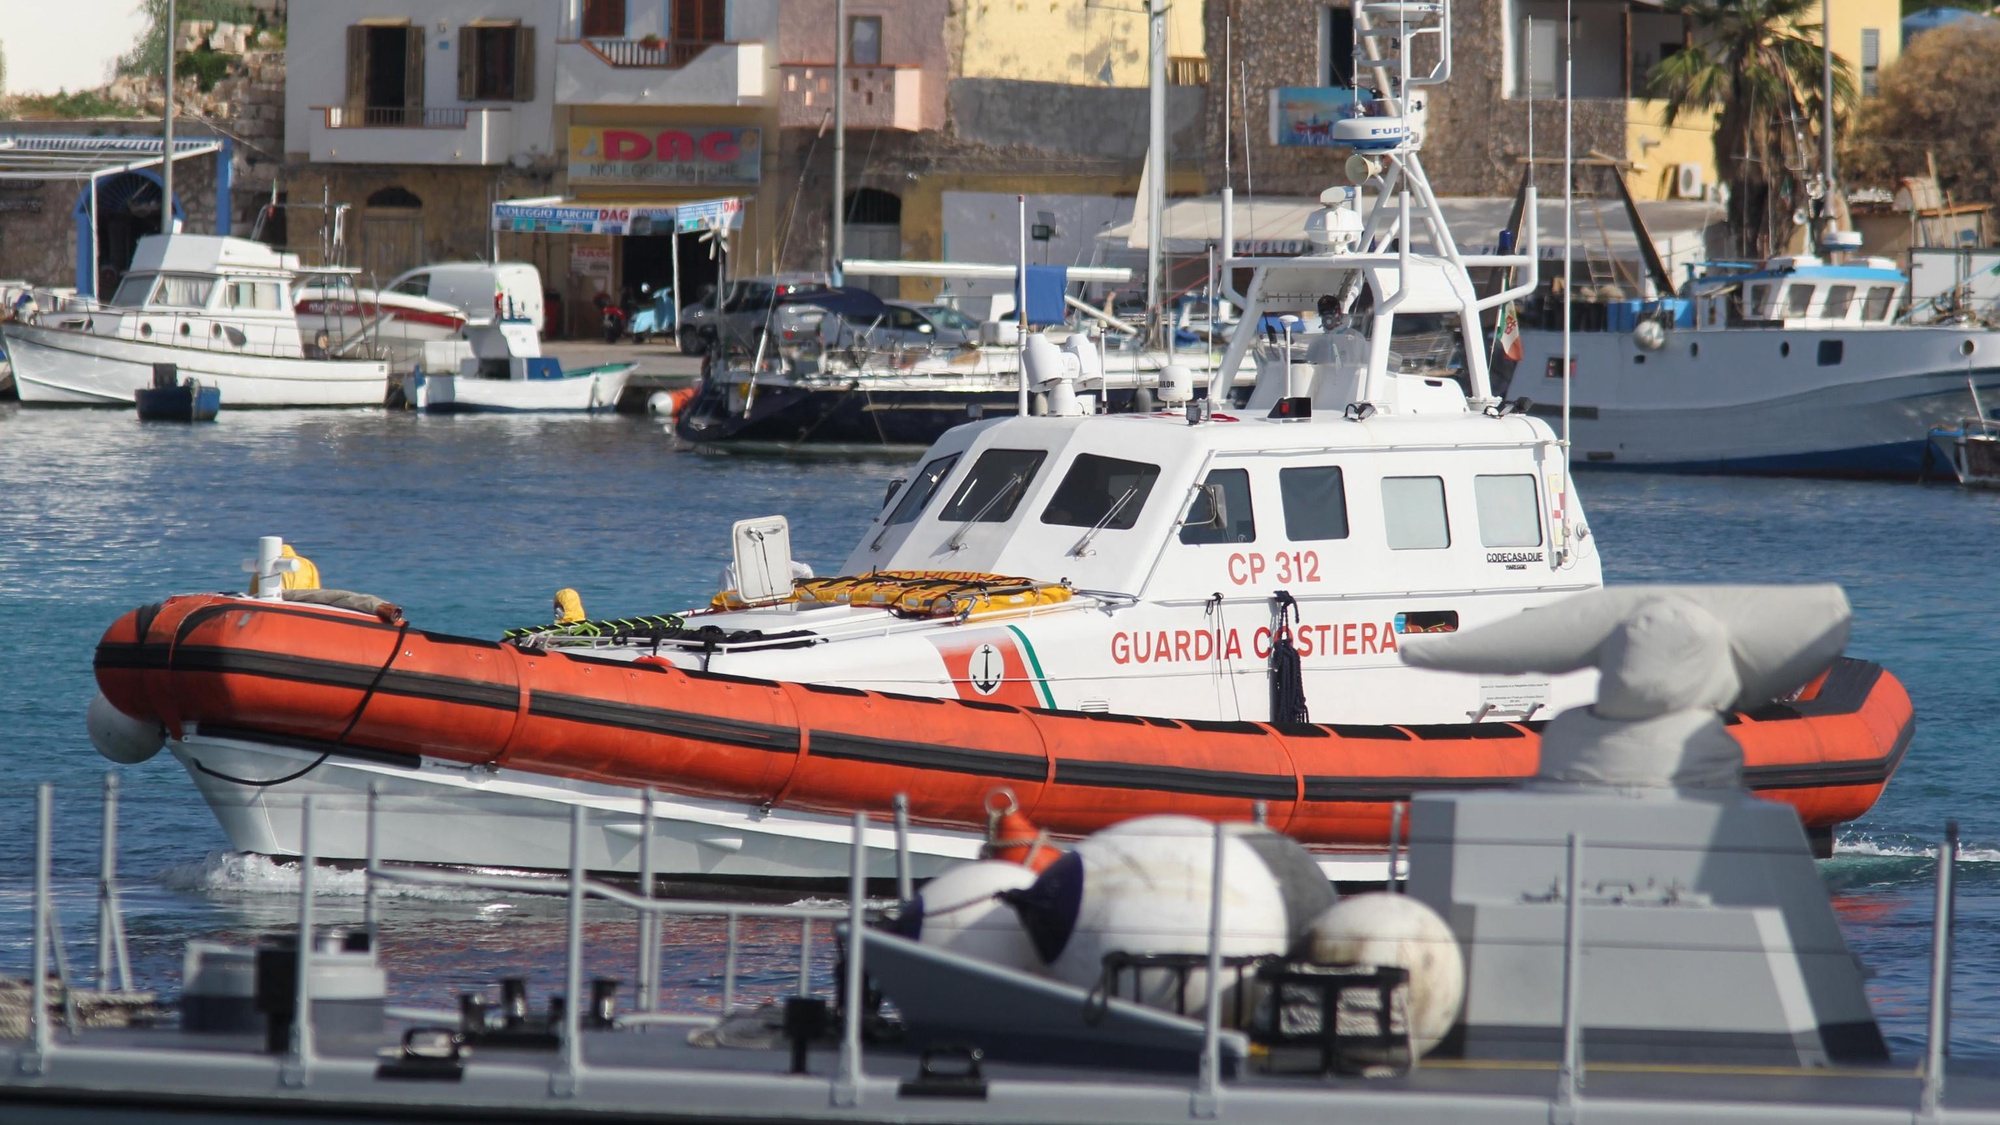 epa07927791 An Italian Coast Guard boat arrives with the coffins containing the bodies of seven migrants recovered from a migrant boat that capsized and sunk on 07 October, in Lampedusa, Sicily island, southern Italy, 17 October 2019. Some 13 people - 12 of them women are reported dead on 07 October when a small boat full of migrants capsizes off Lampedusa.  EPA/PASQUALE CLAUDIO MONTANA LAMPO